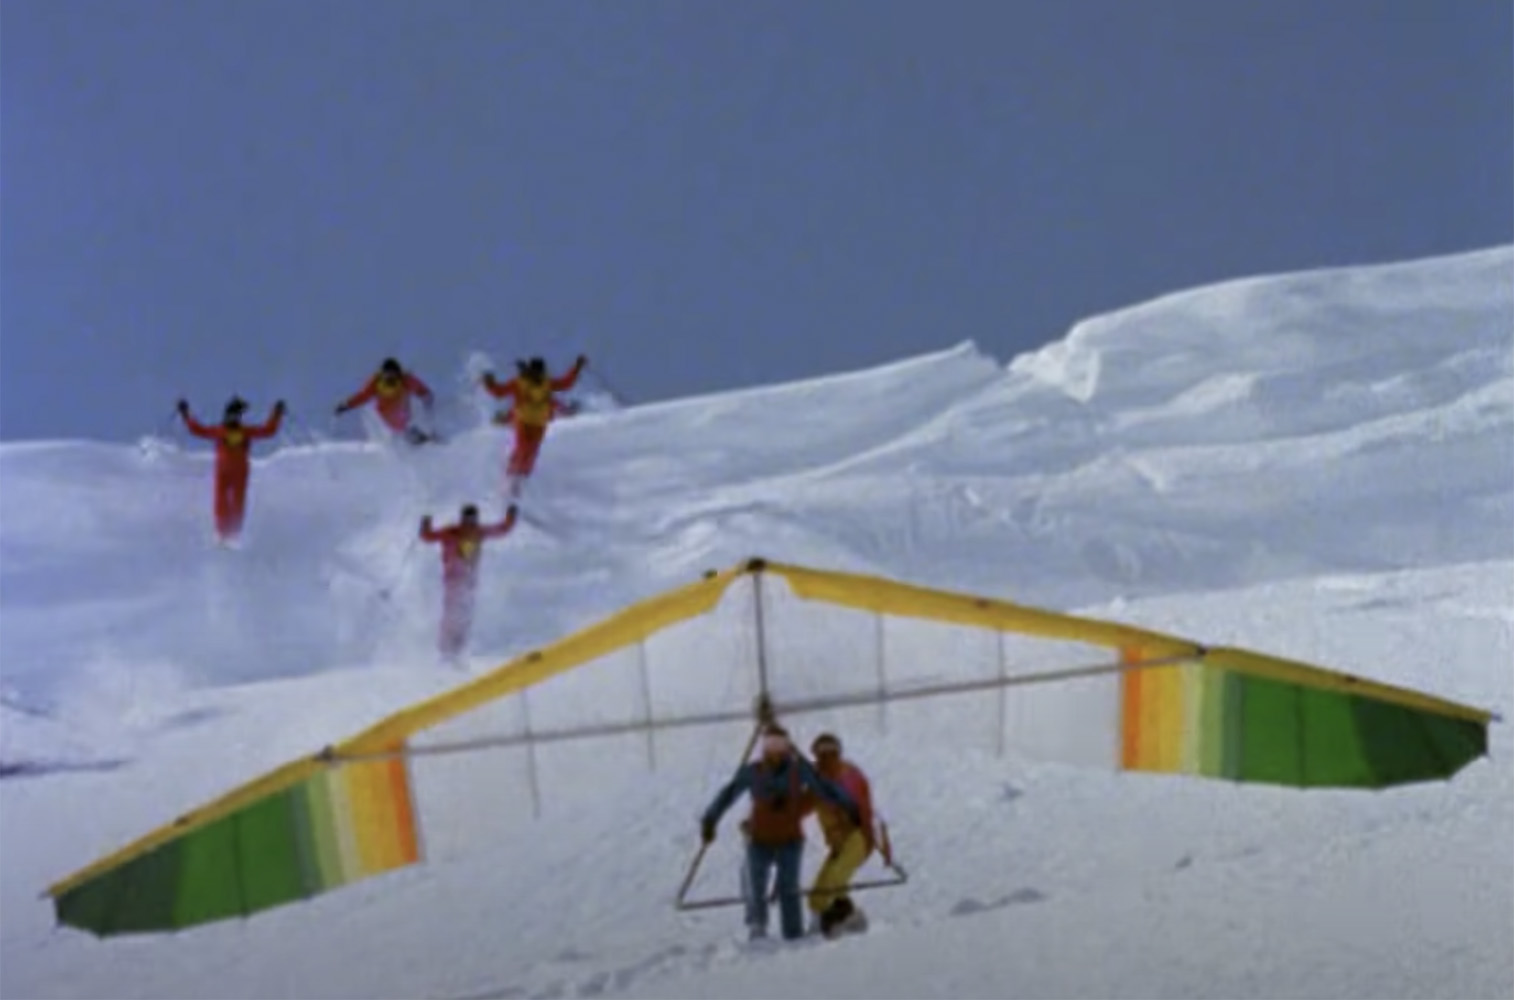 On Blister Cinematic, we talk about the craziest — and arguably the greatest — snowboard / ski / monoski / snowblade film of all time, Apocalypse Snow. This 26-minute film was seen by millions of people when it came out, and nearly 40 years later, it still feels wildly innovative, fresh, and amazing.